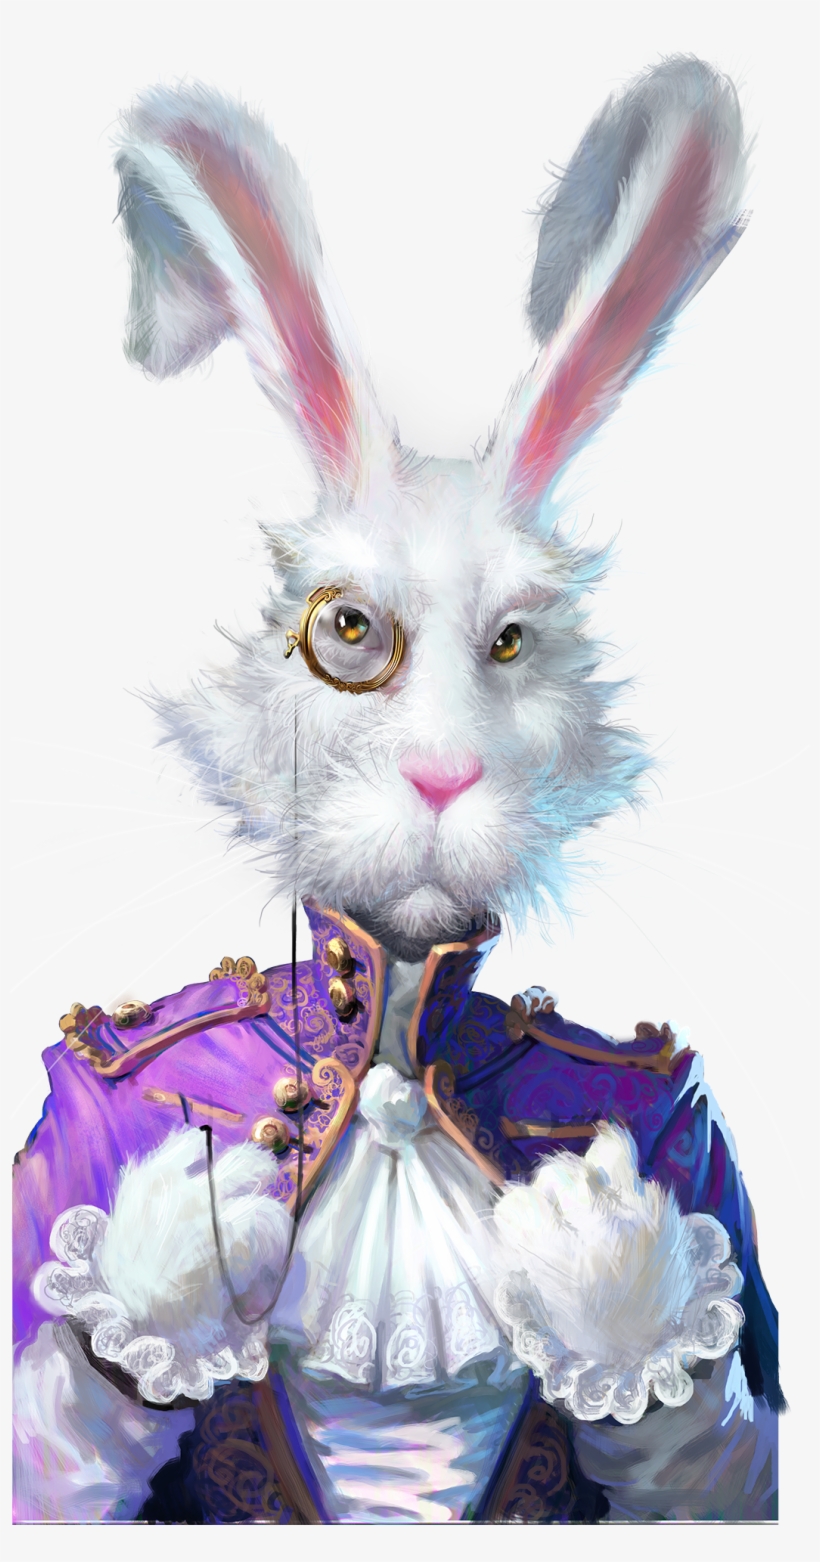 Play White Rabbit Now - Online Casino, transparent png #1654964